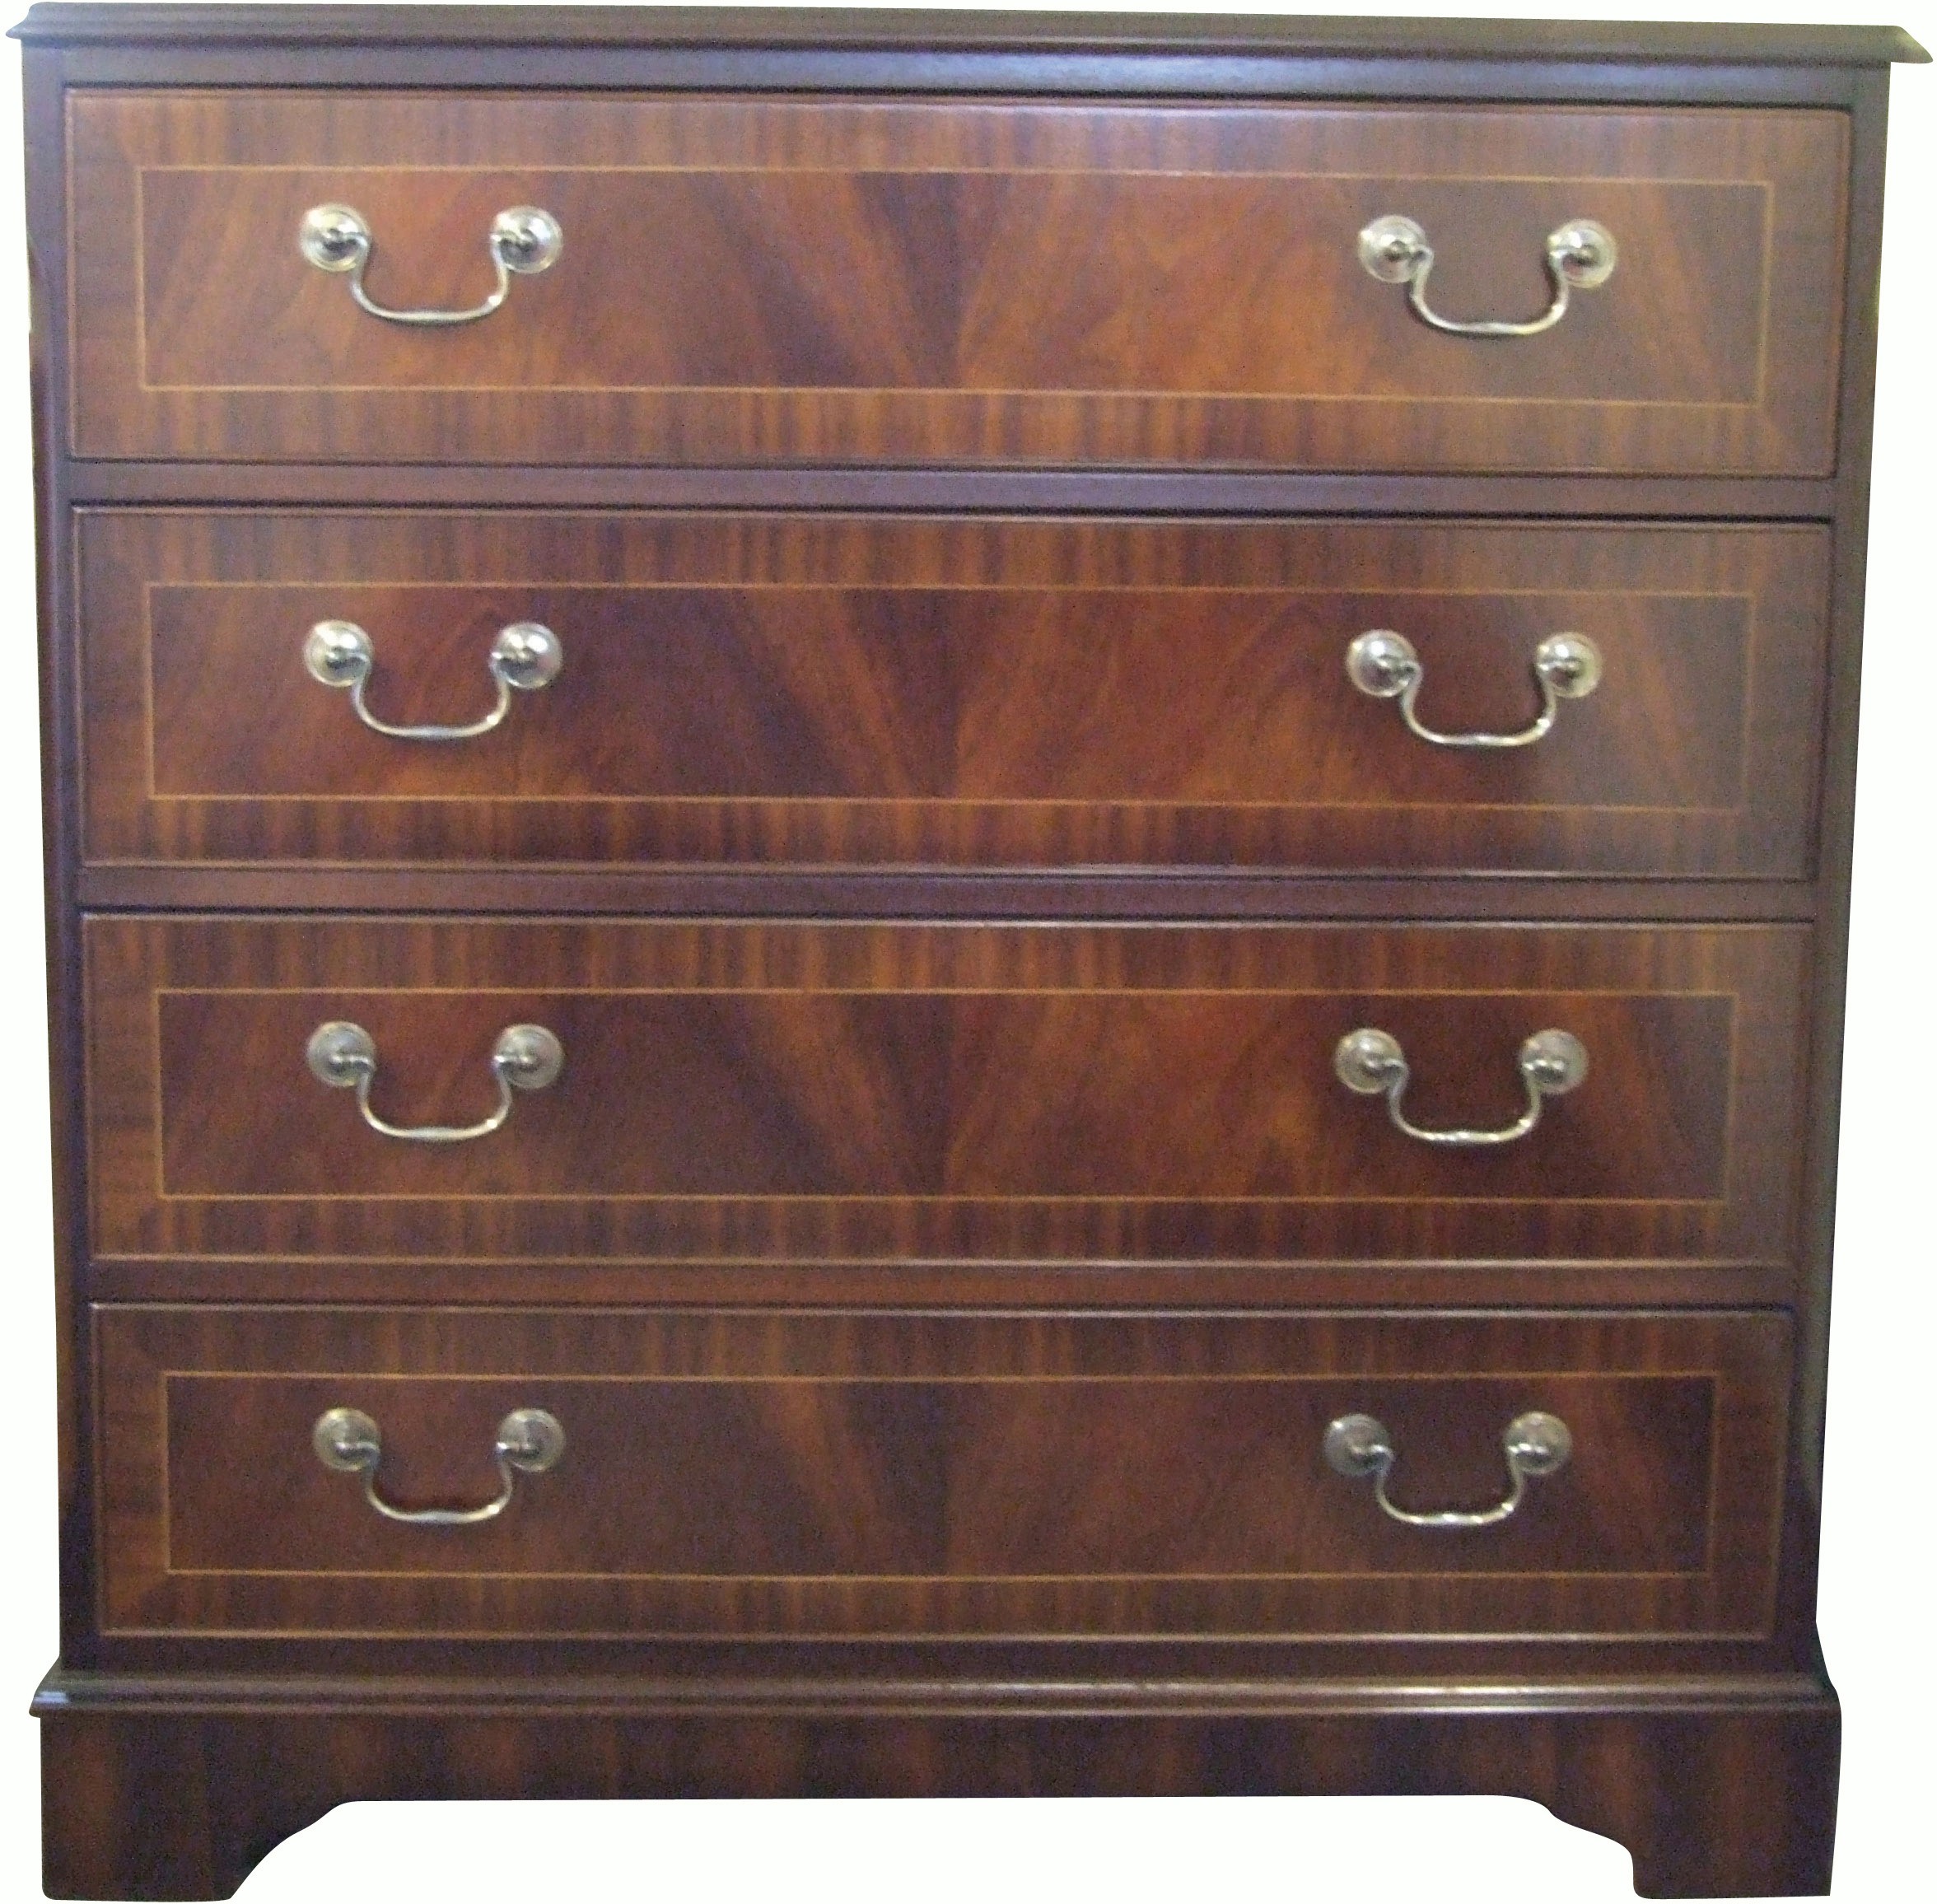 Large 4 Drawer Inlaid Chest